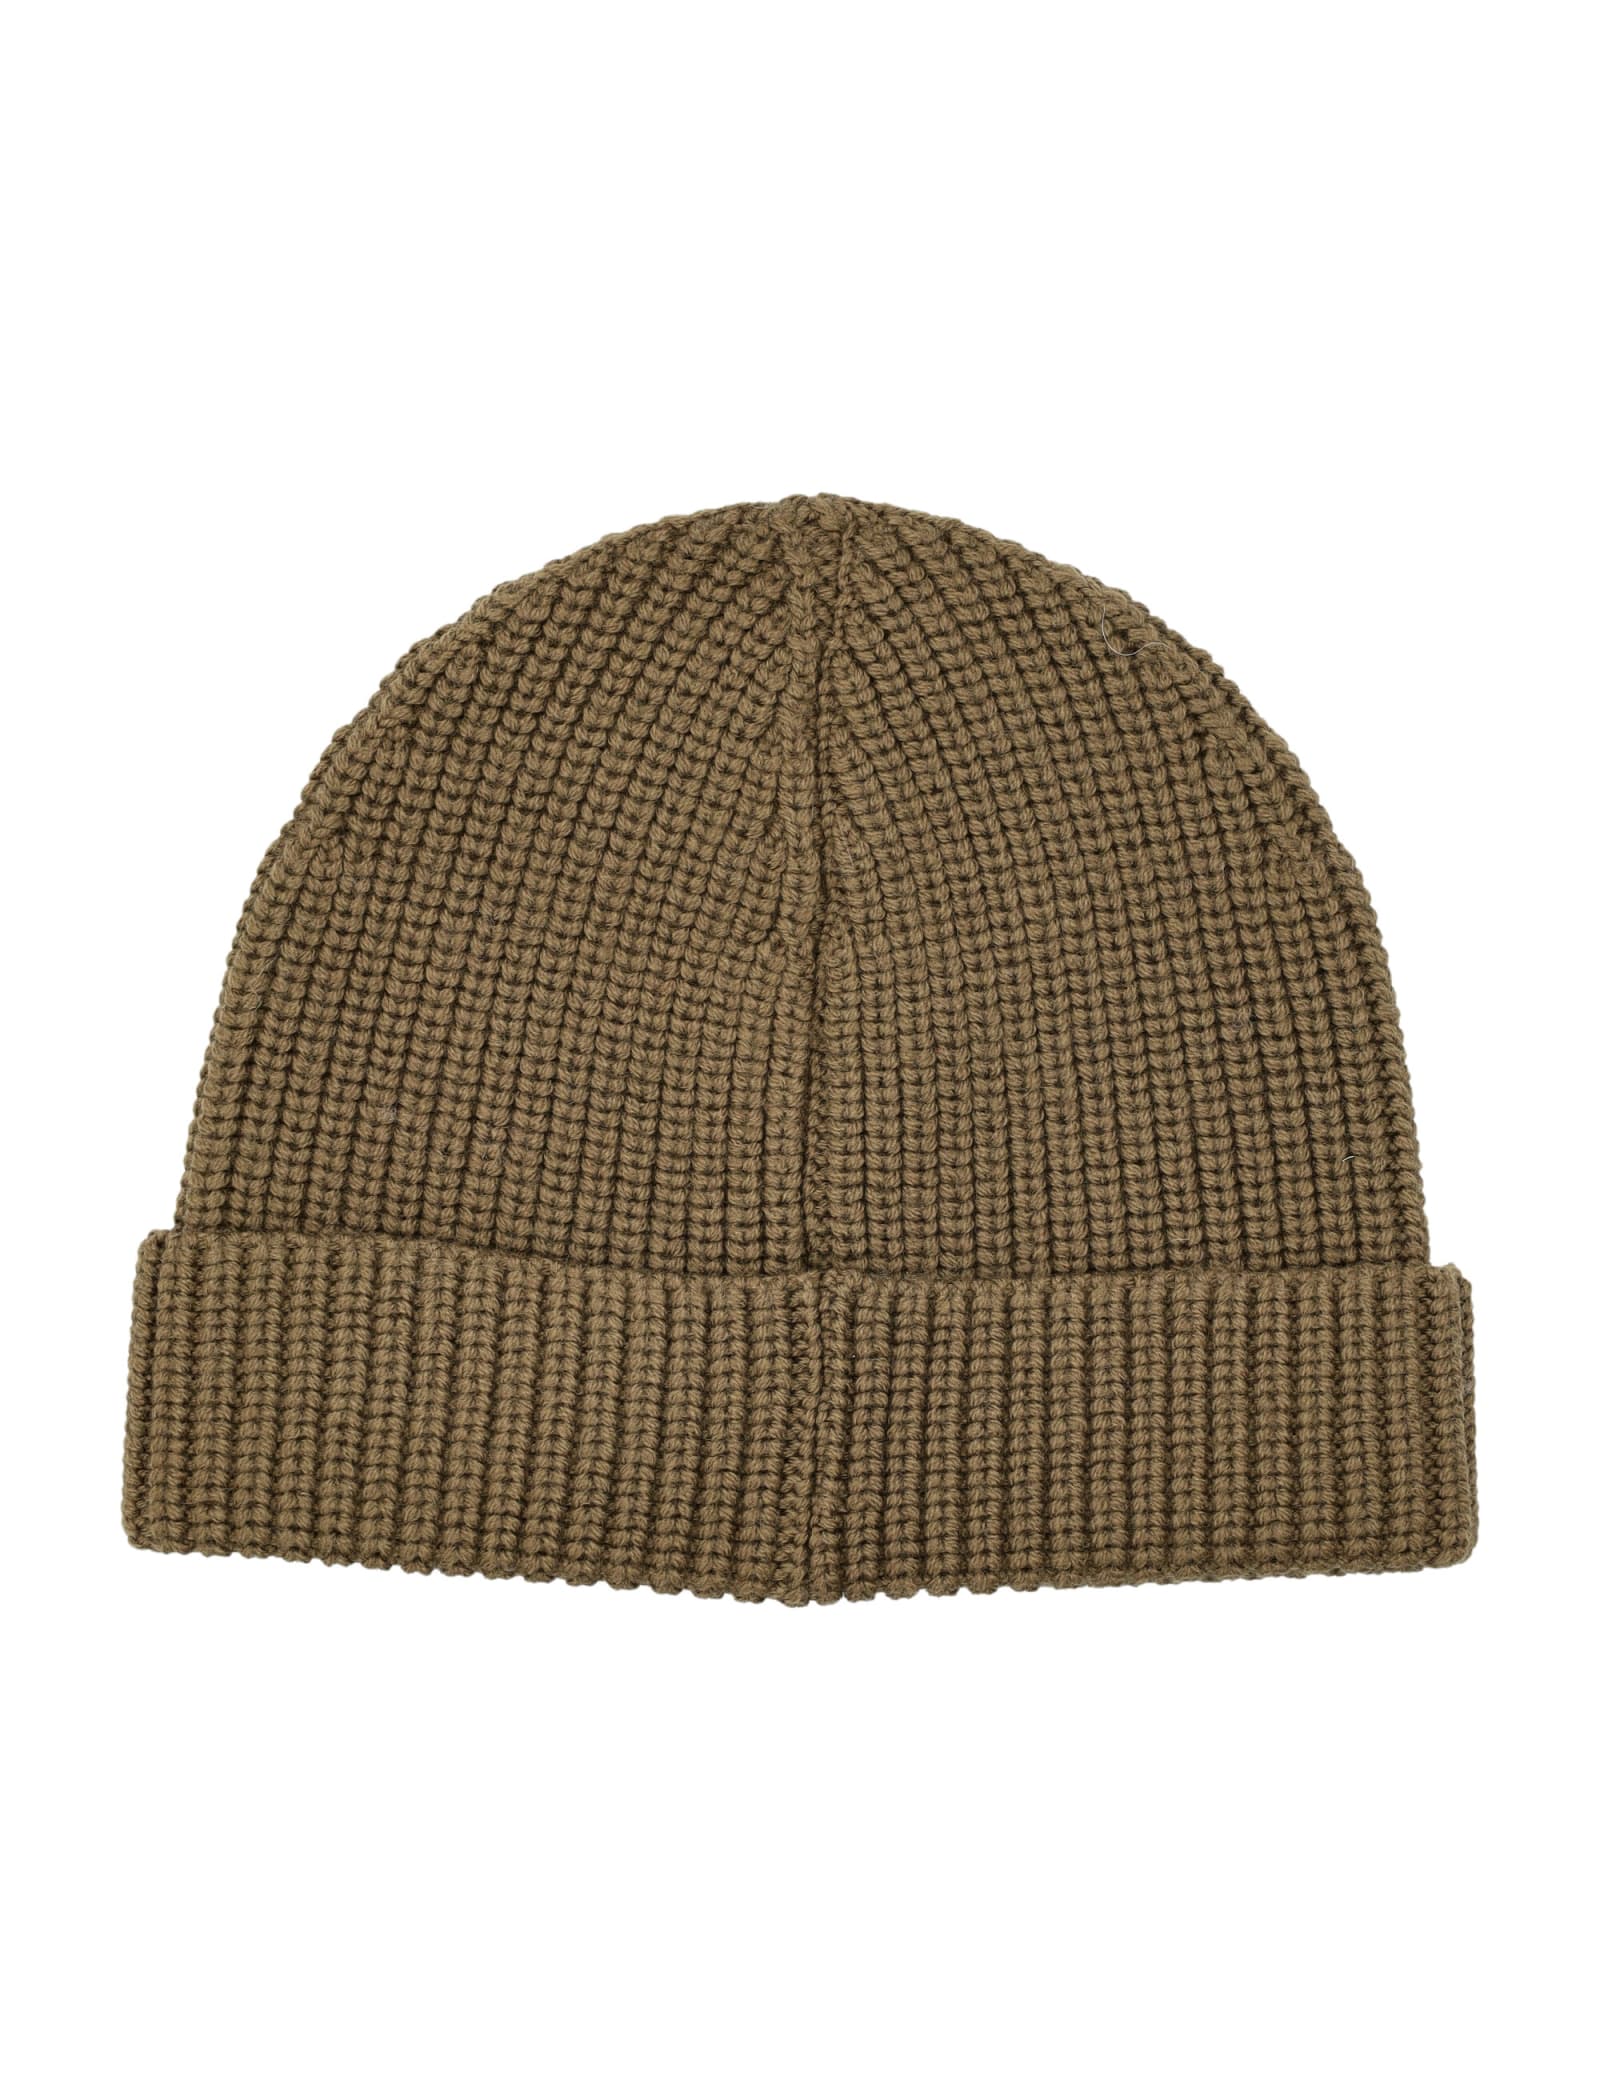 Off-white Classic Knit Beanie Black White In Army Green | ModeSens